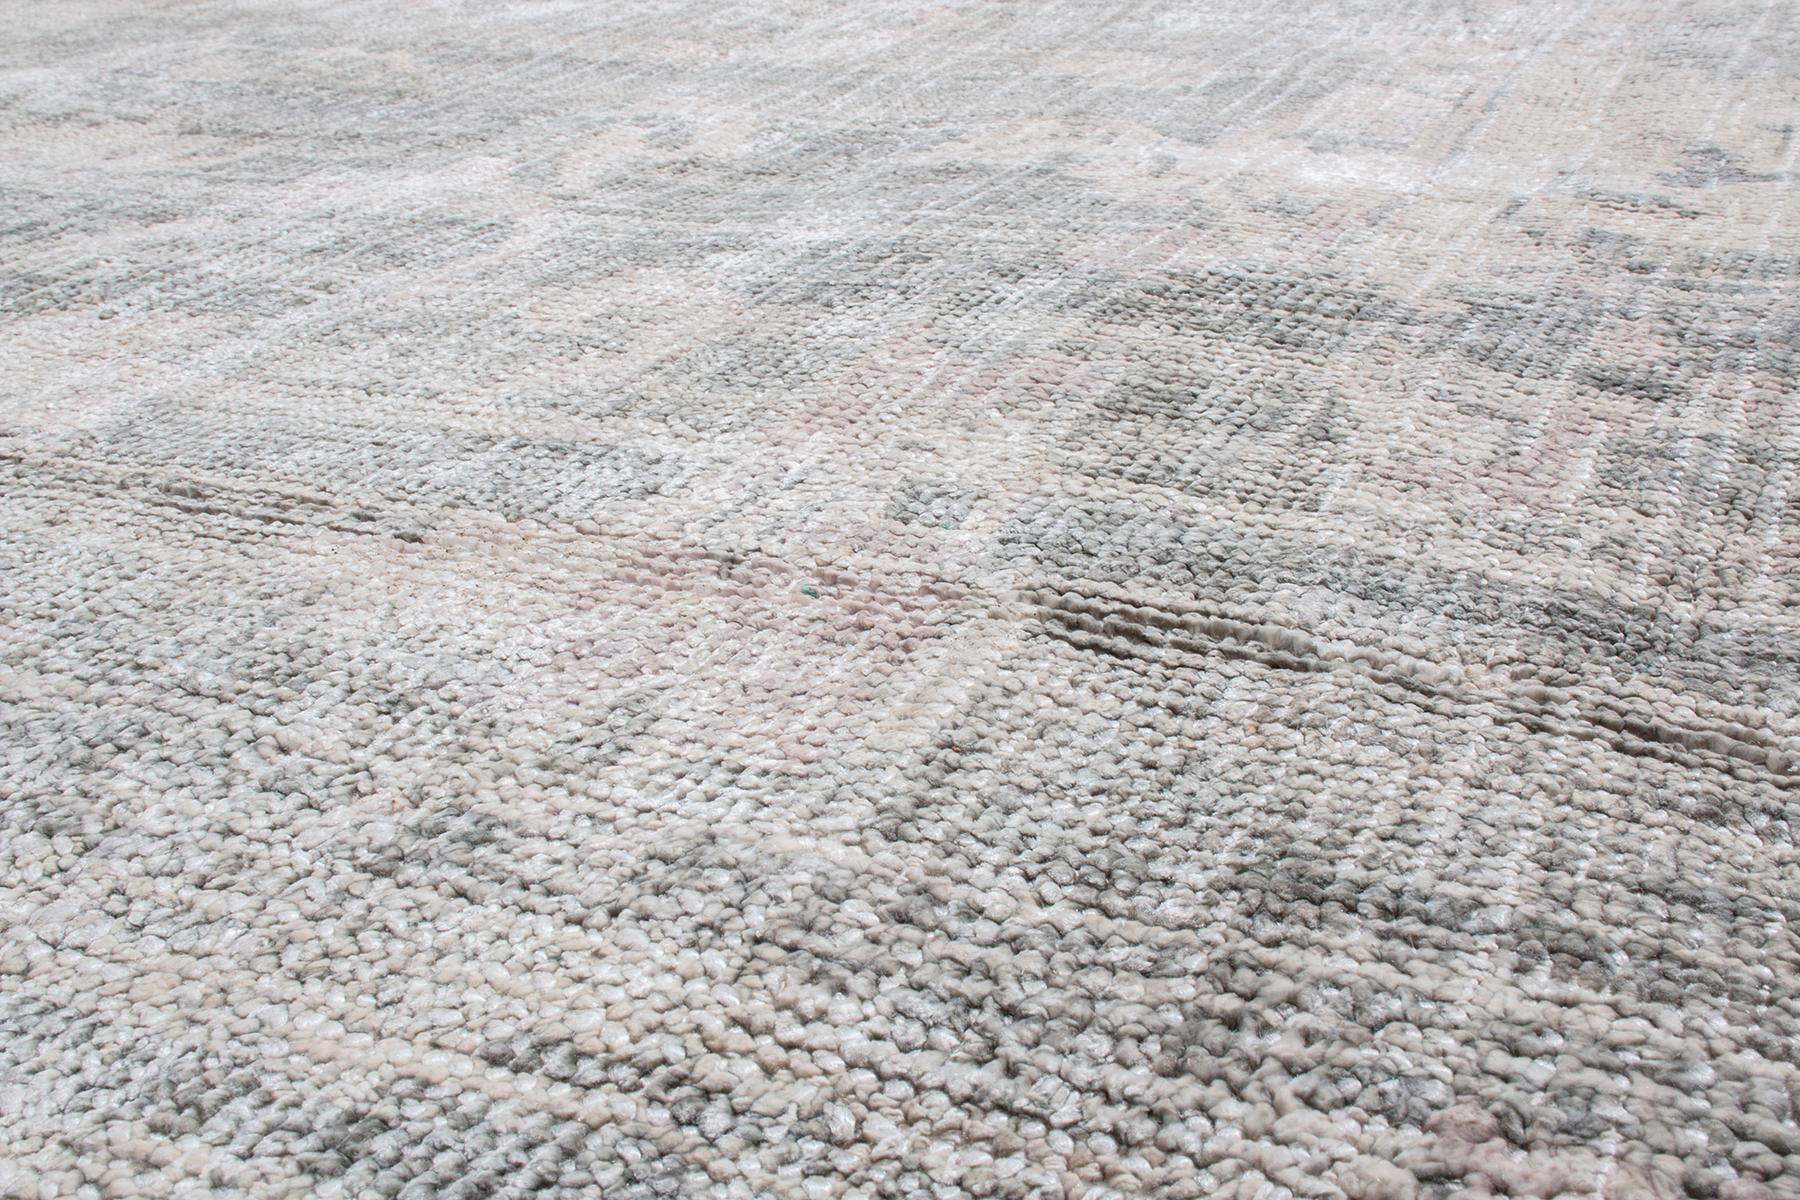 Hand-knotted in one of our most reputed workshops in India, this piece is the latest to join Rug & Kilim’s Modern Classics collection celebrating their unique blend of wool and heavy, lustrous silk with a marriage of traditional and transitional